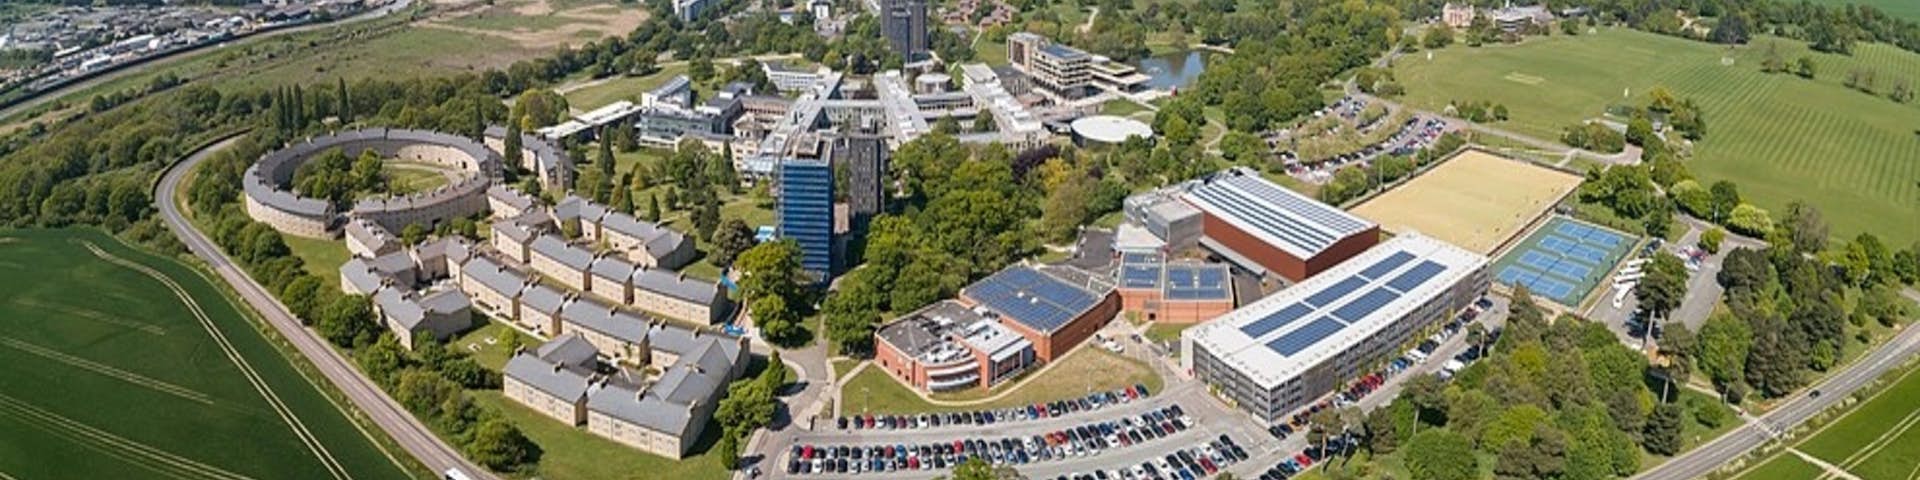 Financial and Business Economics at University of Essex 